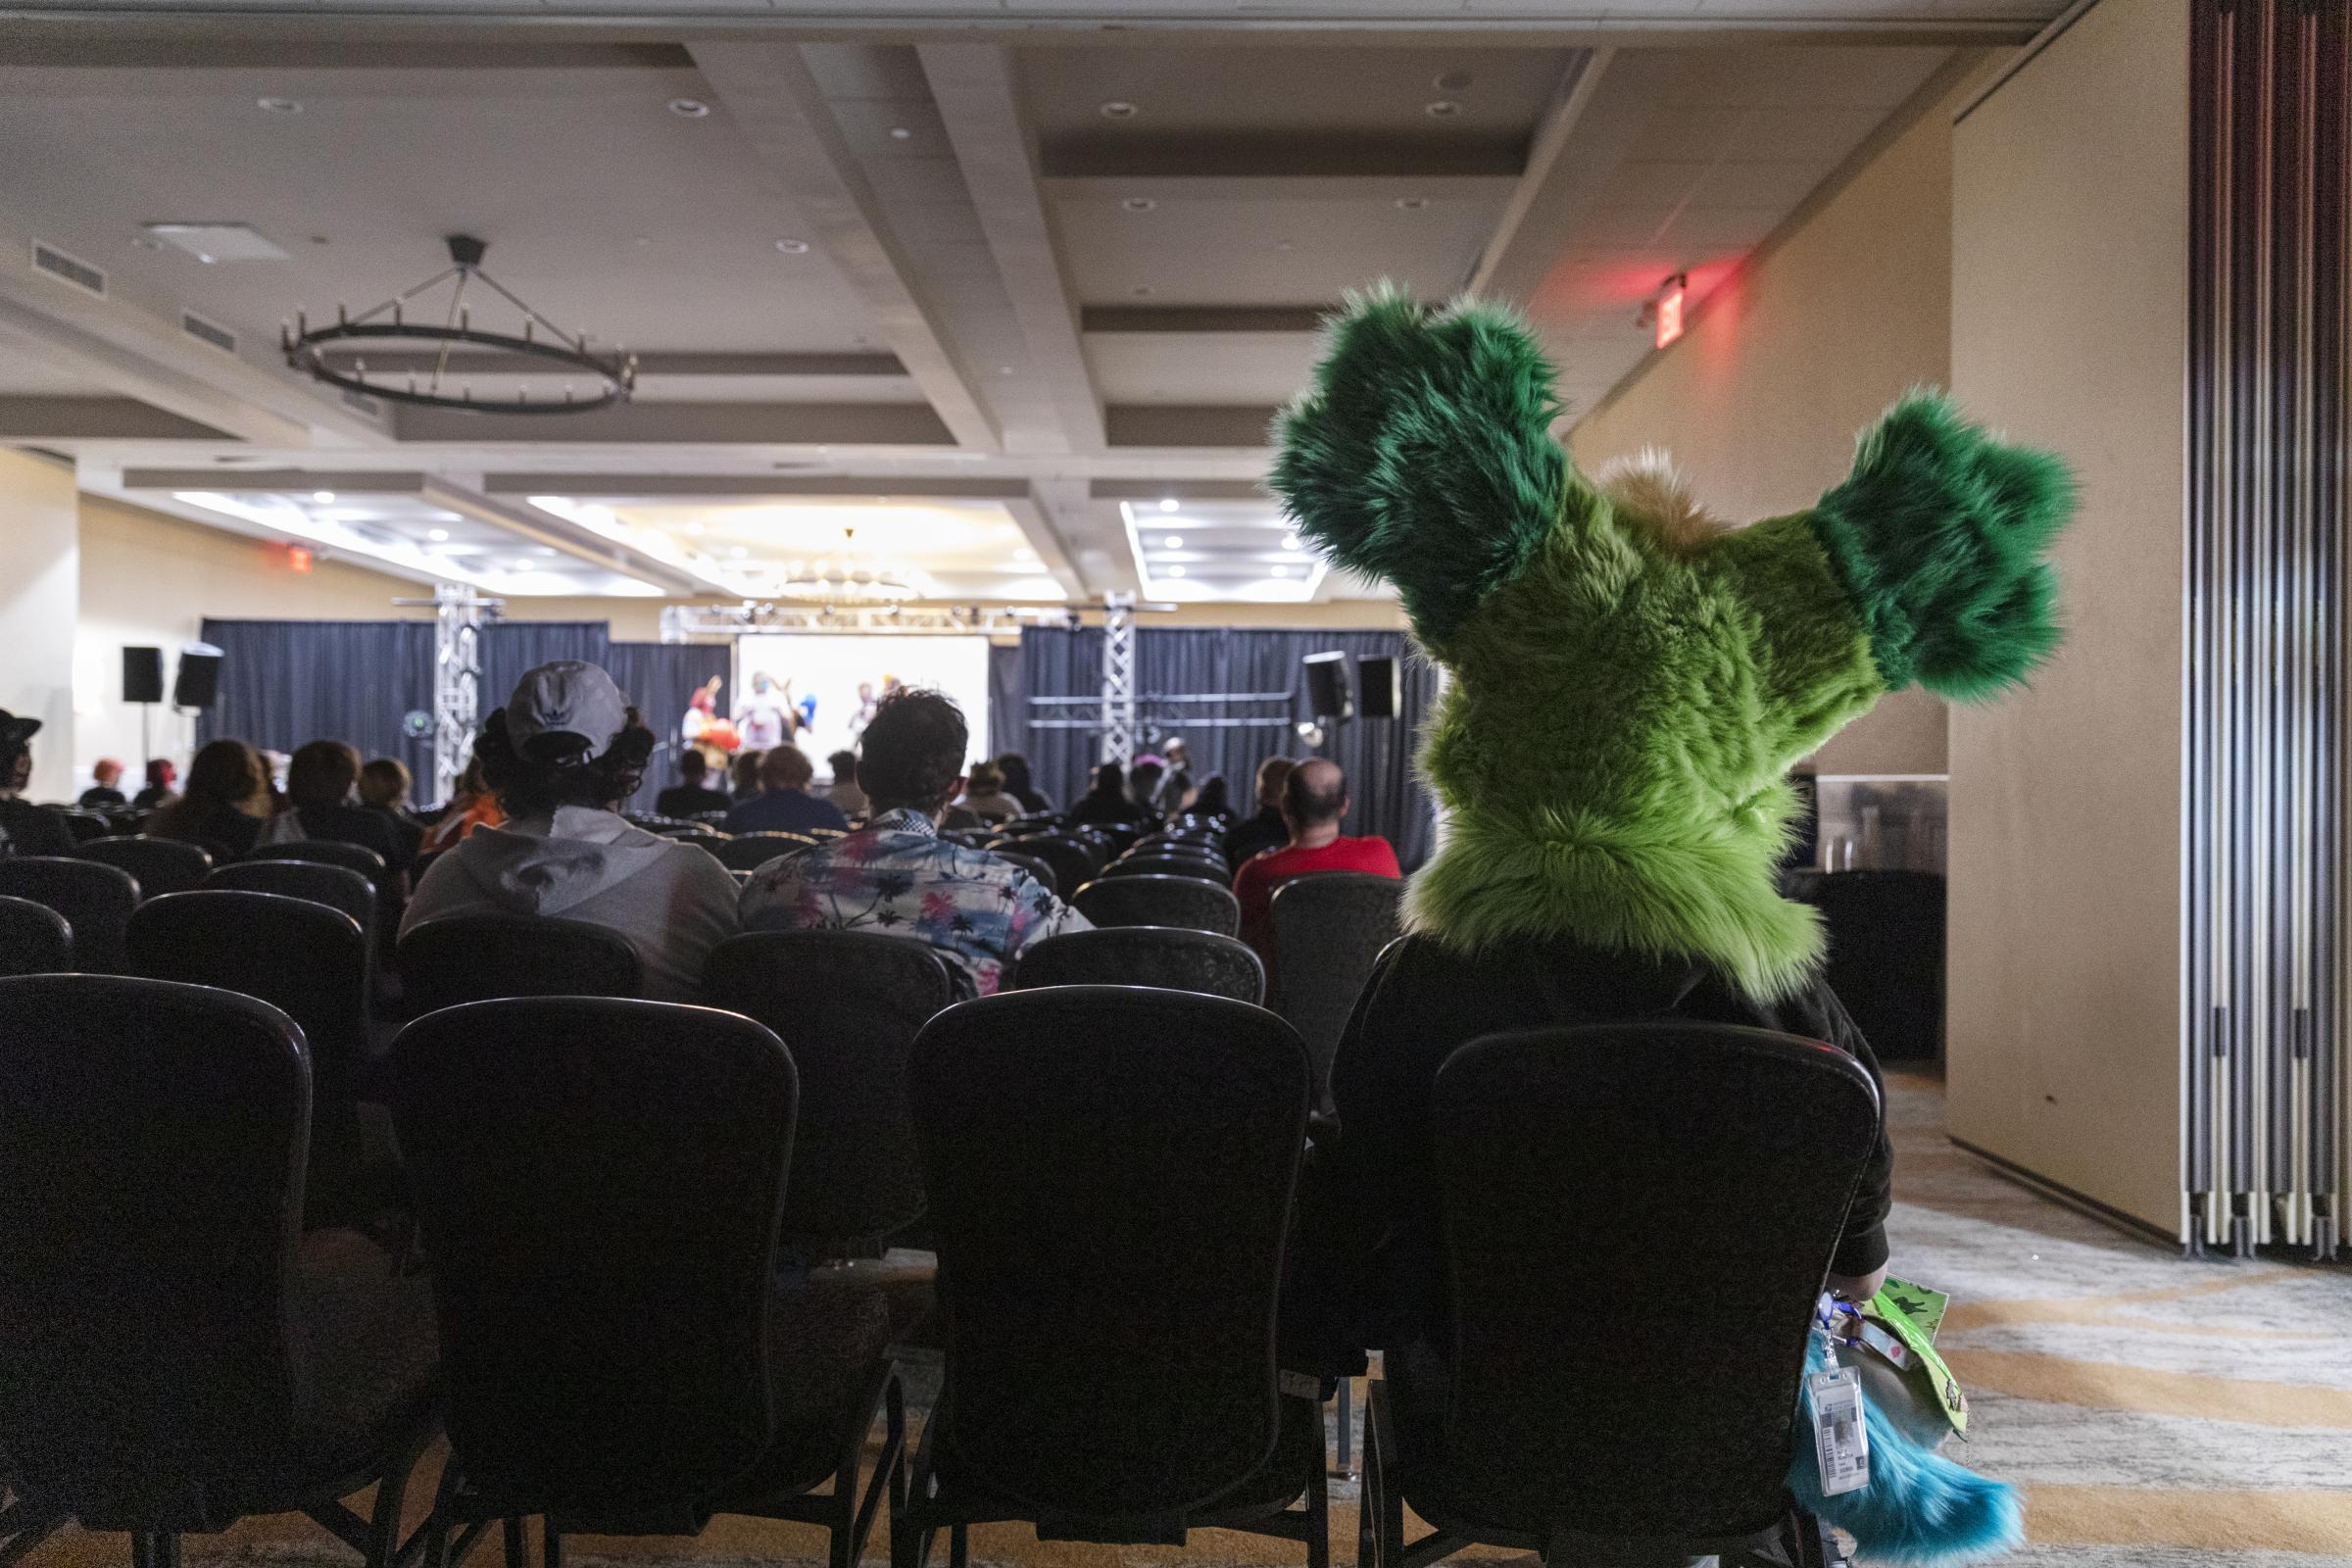 Furry Fandom - Games were held in the main hall with furries competing in silly games.